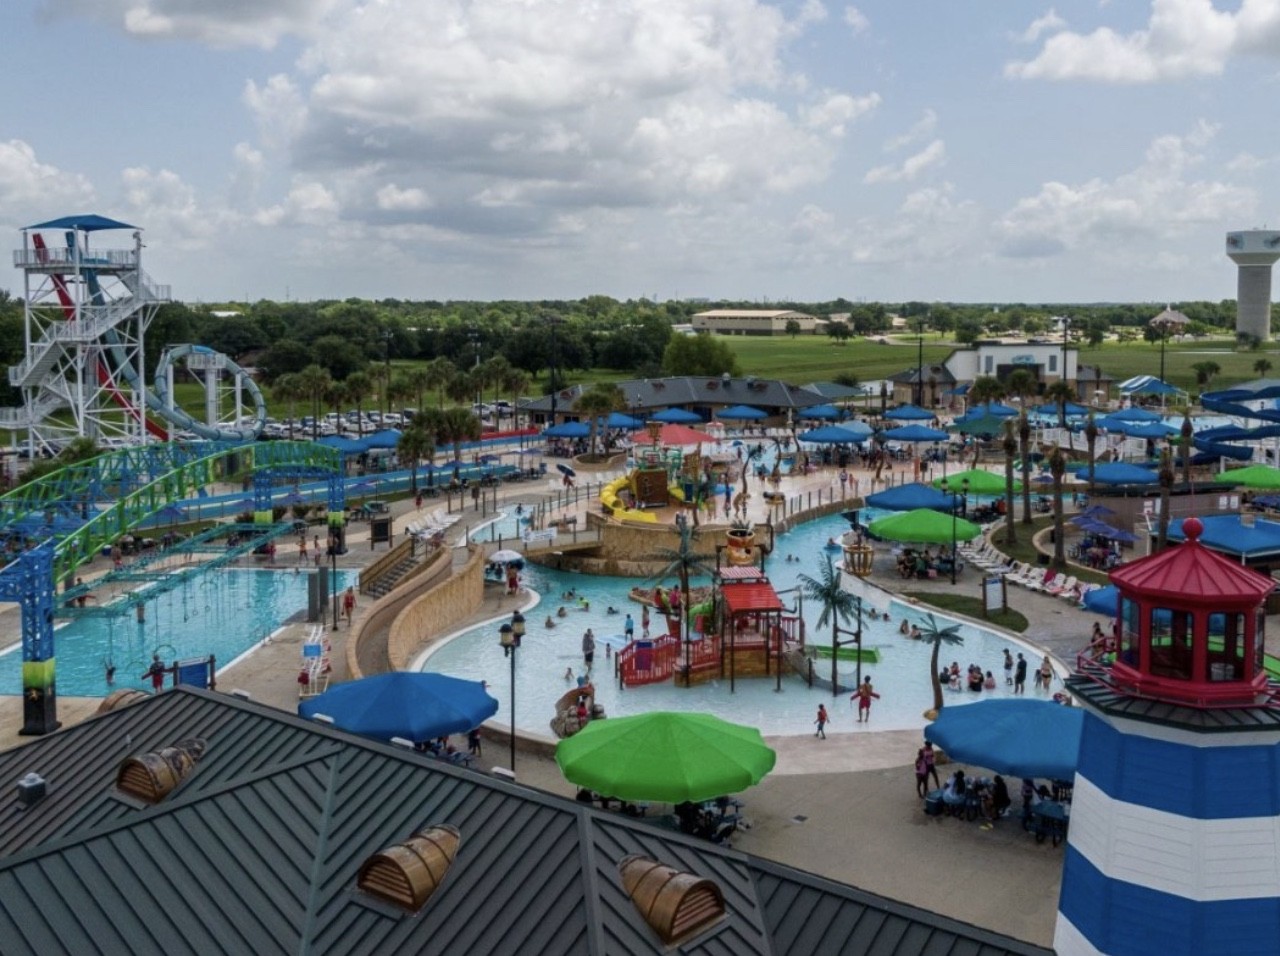 Pirates Bay Water Park
5300 E Road, Baytown, (281) 422-1150, baytown.org
Pirates Bay grants you access to an abundance of water slides, wave pools, a lazy river and designated areas for the kids to play! Everyone who packs it into the car will be glad they made the trip out to Baytown.